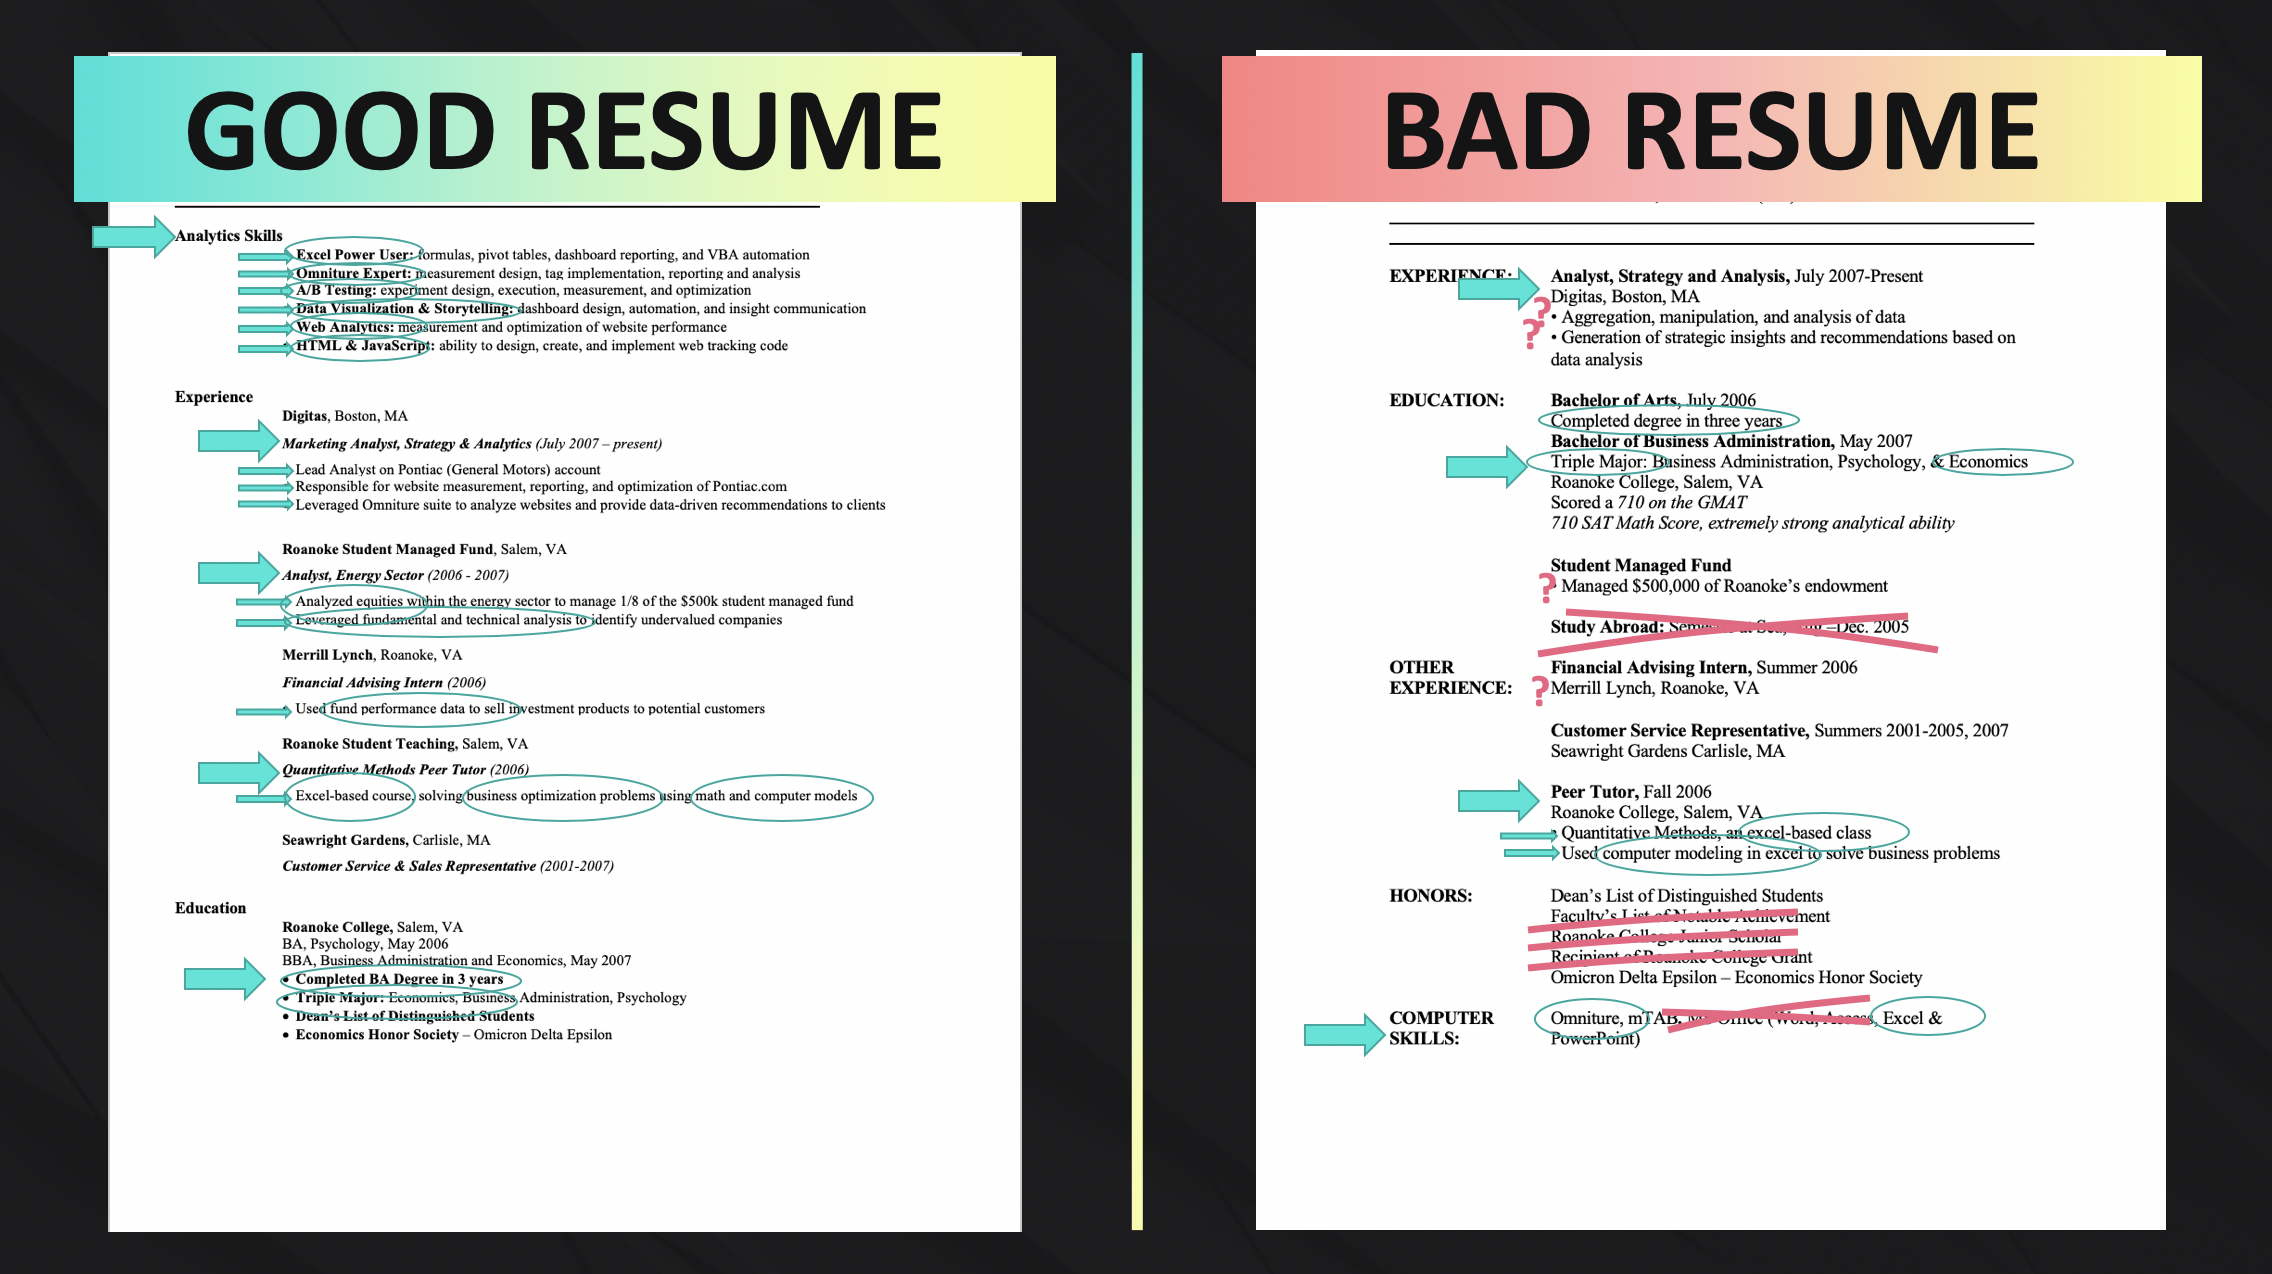 non investing integrator example of resume